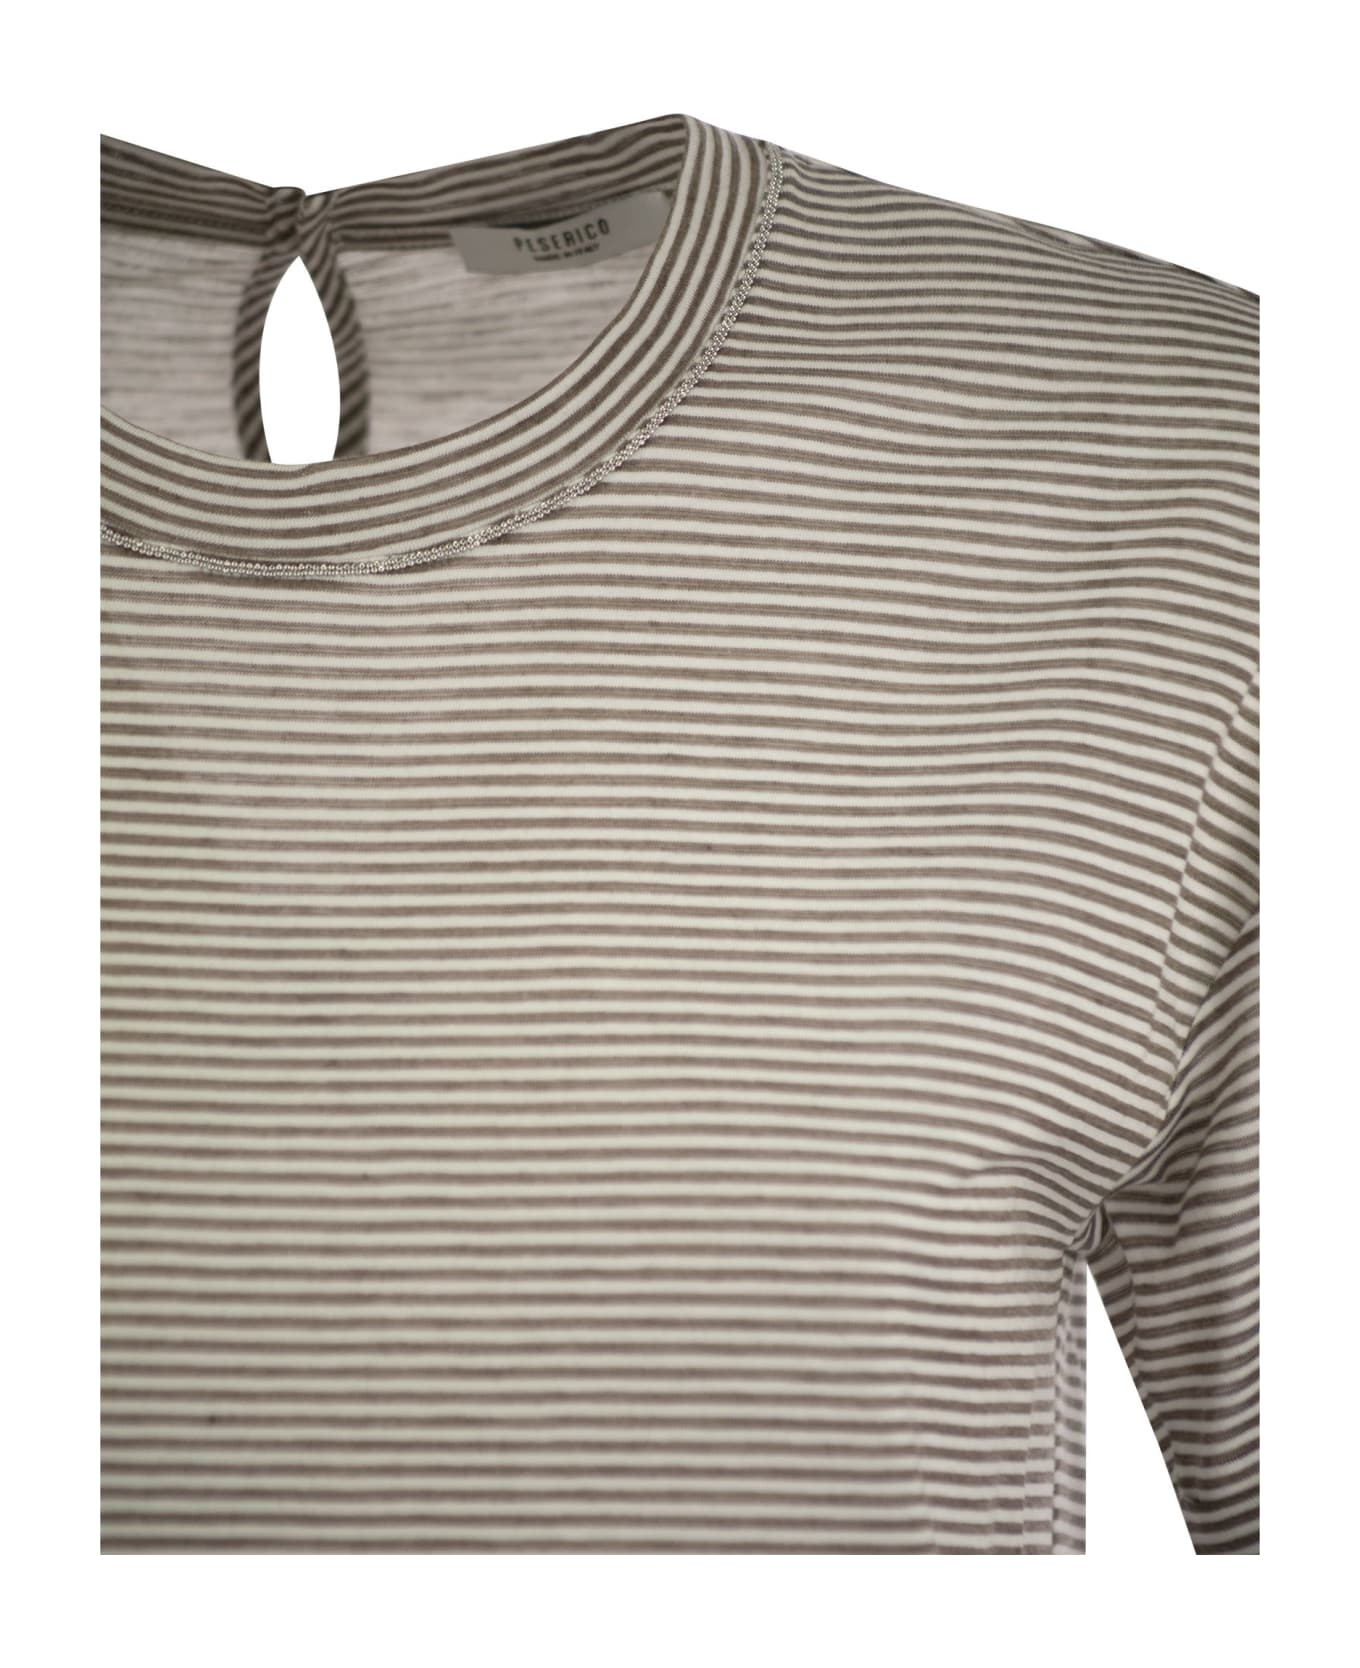 Peserico Lightweight Striped Jersey T-shirt And Punto Luce - Brown/white